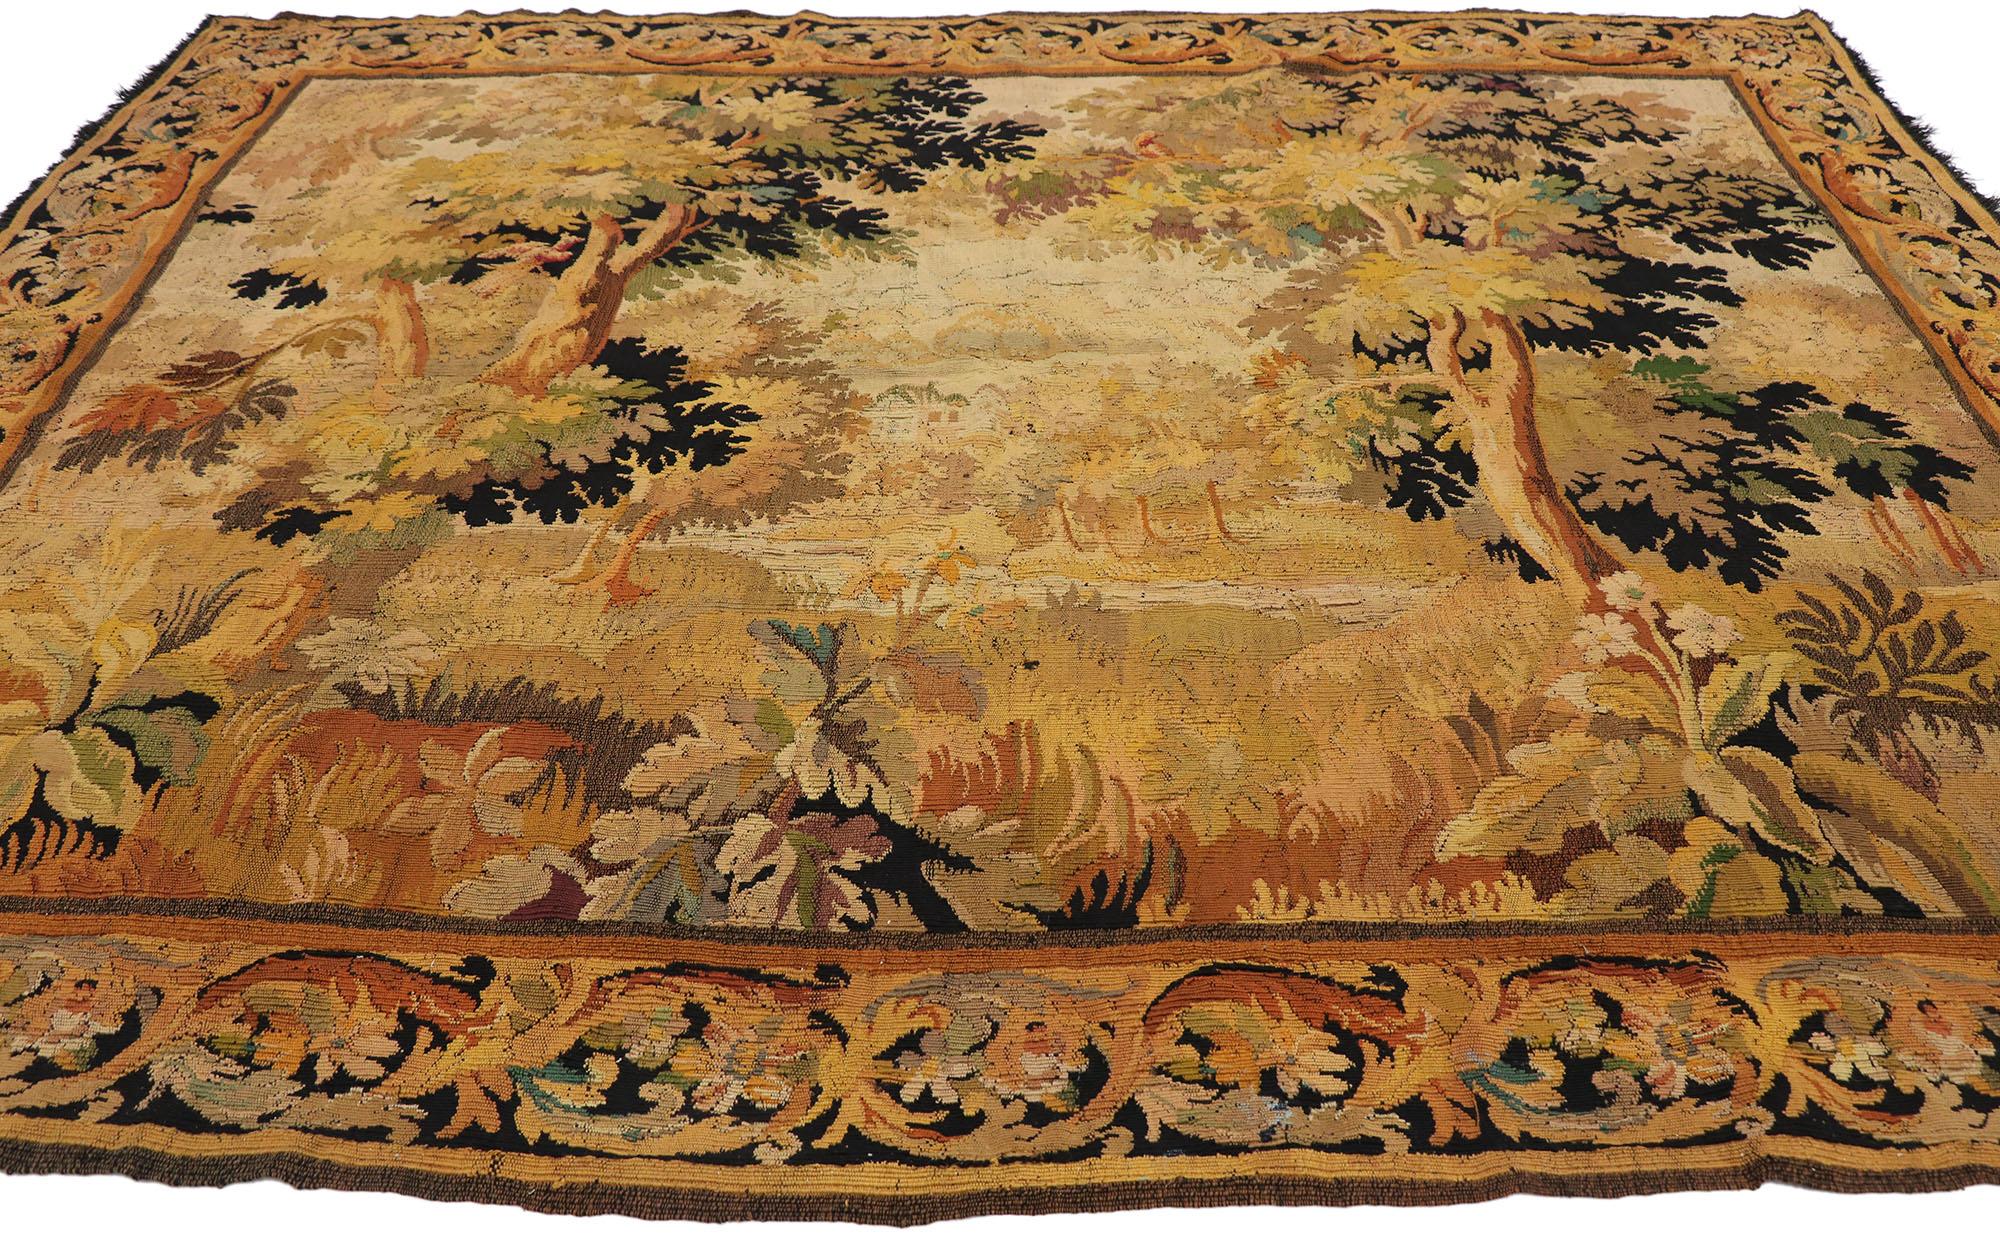 Hand-Woven Antique French Aubusson Verdure Tapestry with Traditional Old World Style